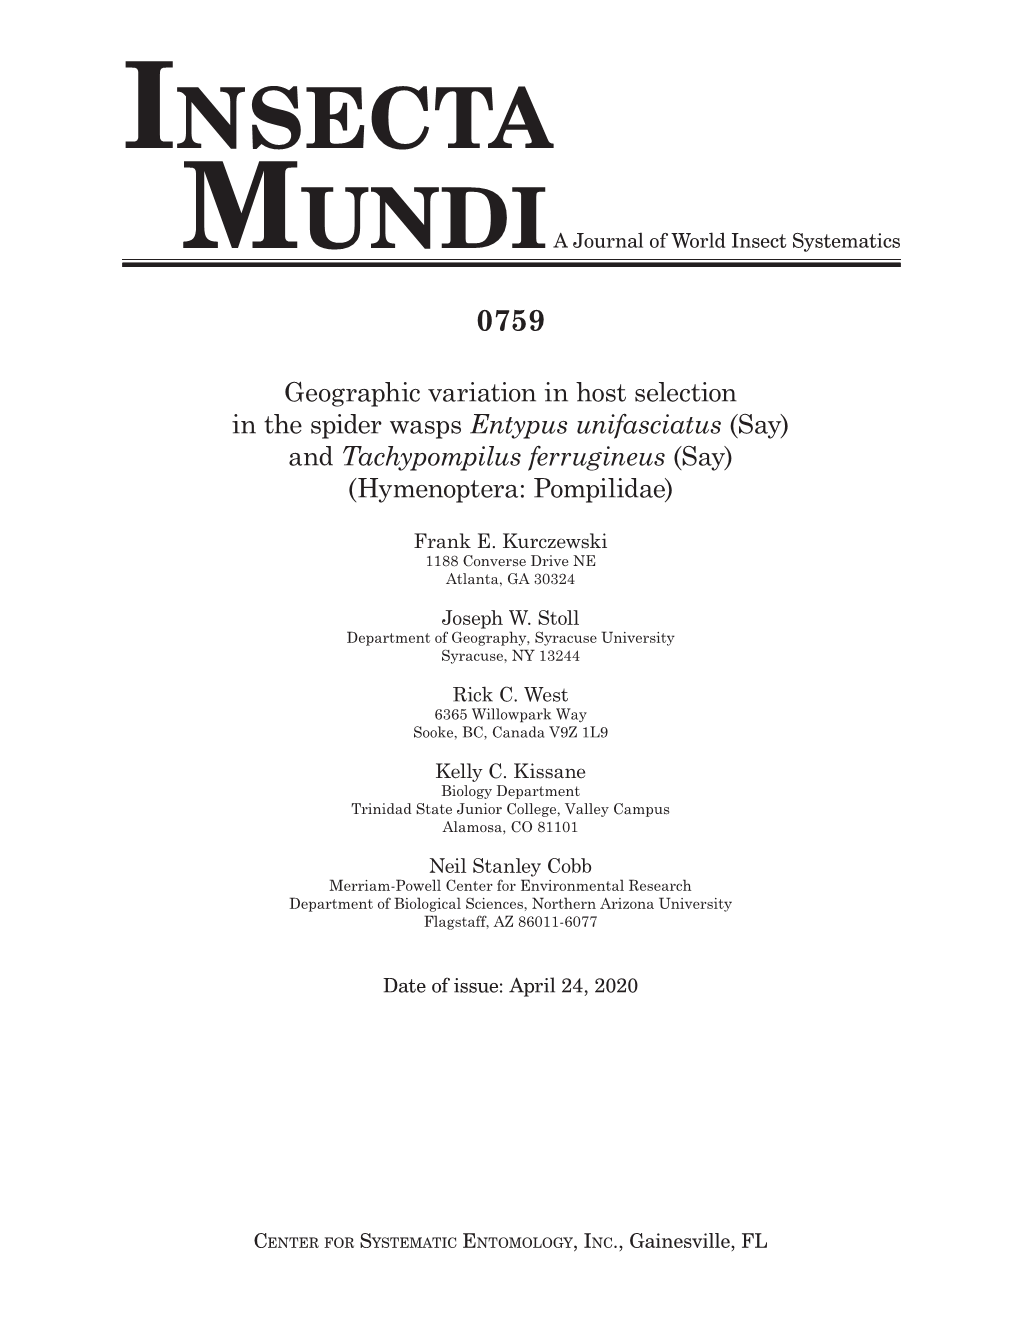 Insecta Mundia Journal of World Insect Systematics